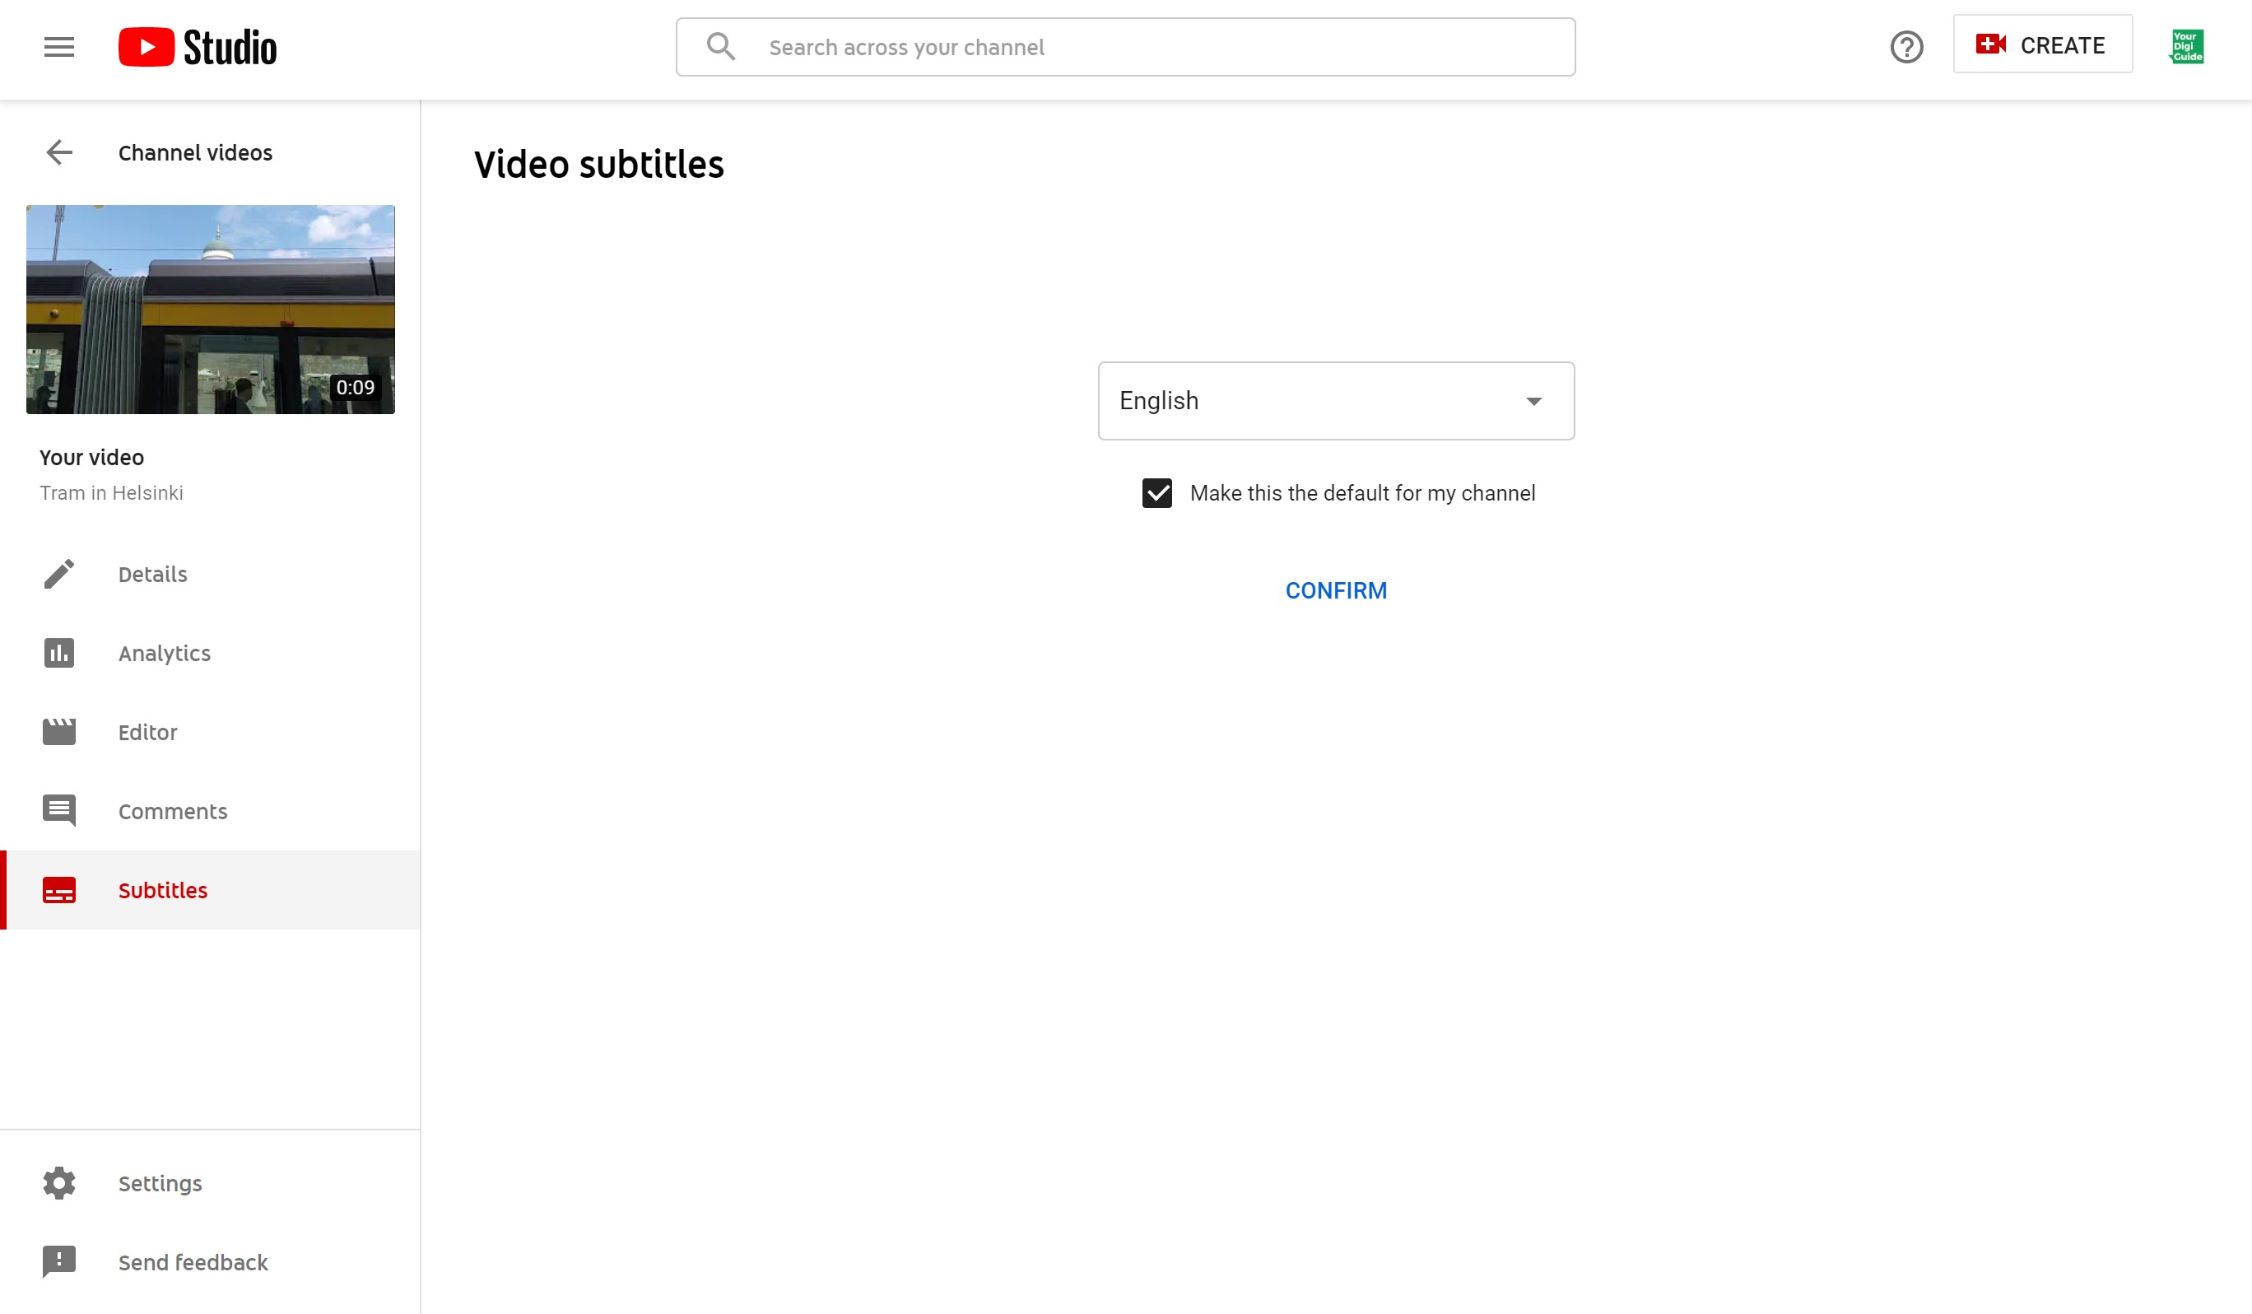 Selecte a language for your YouTube video